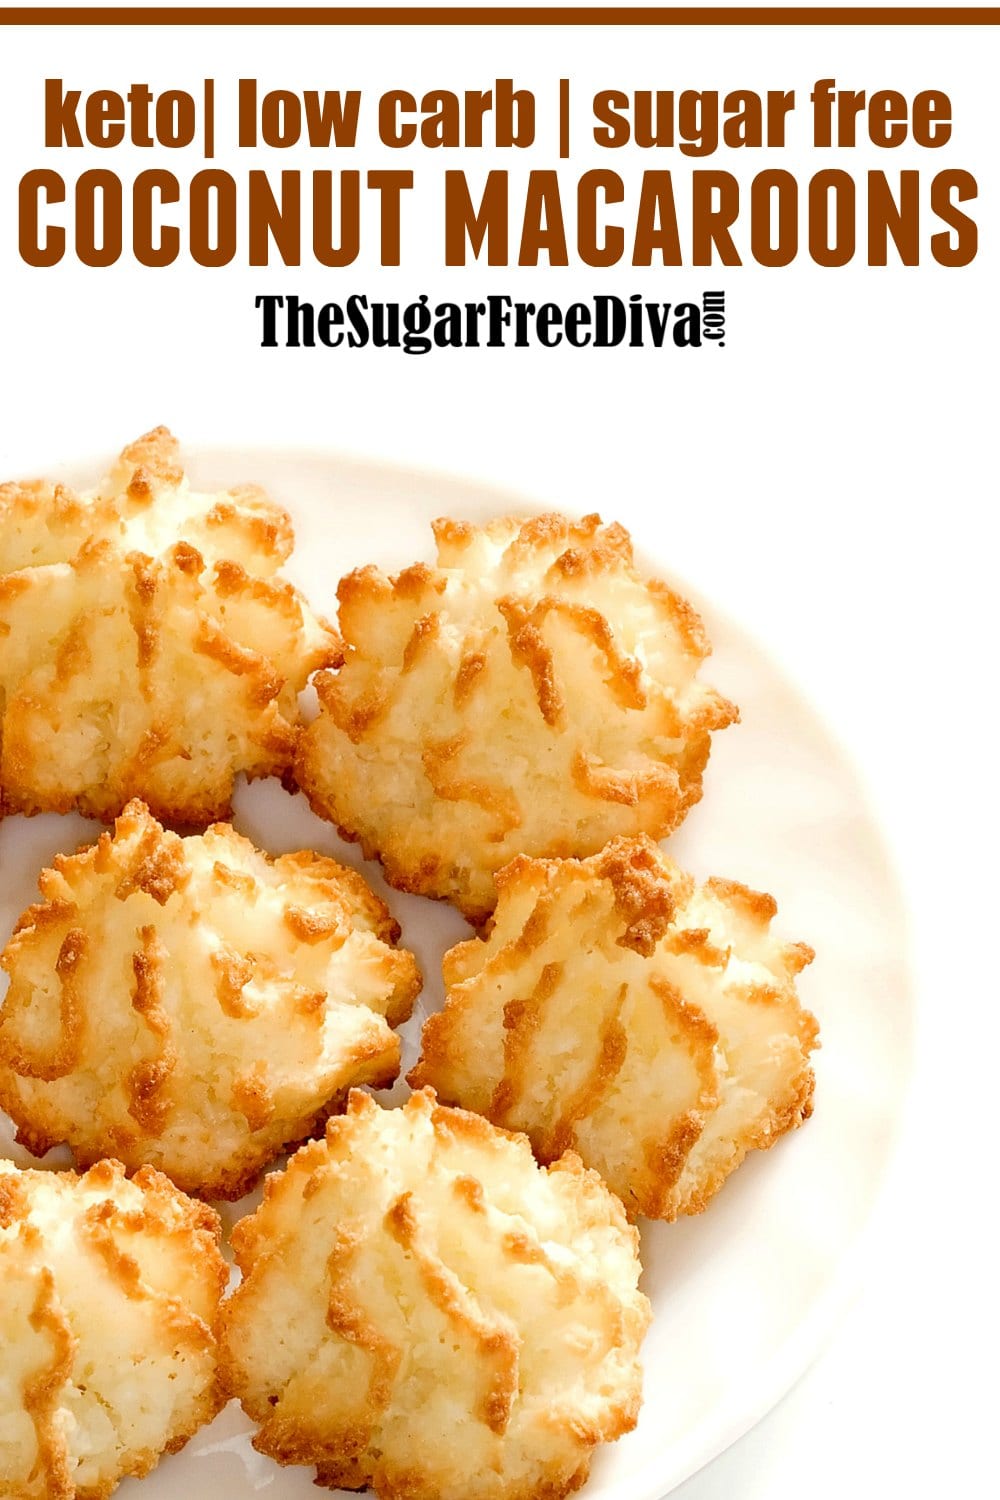 Keto Low Carb Coconut Macaroons